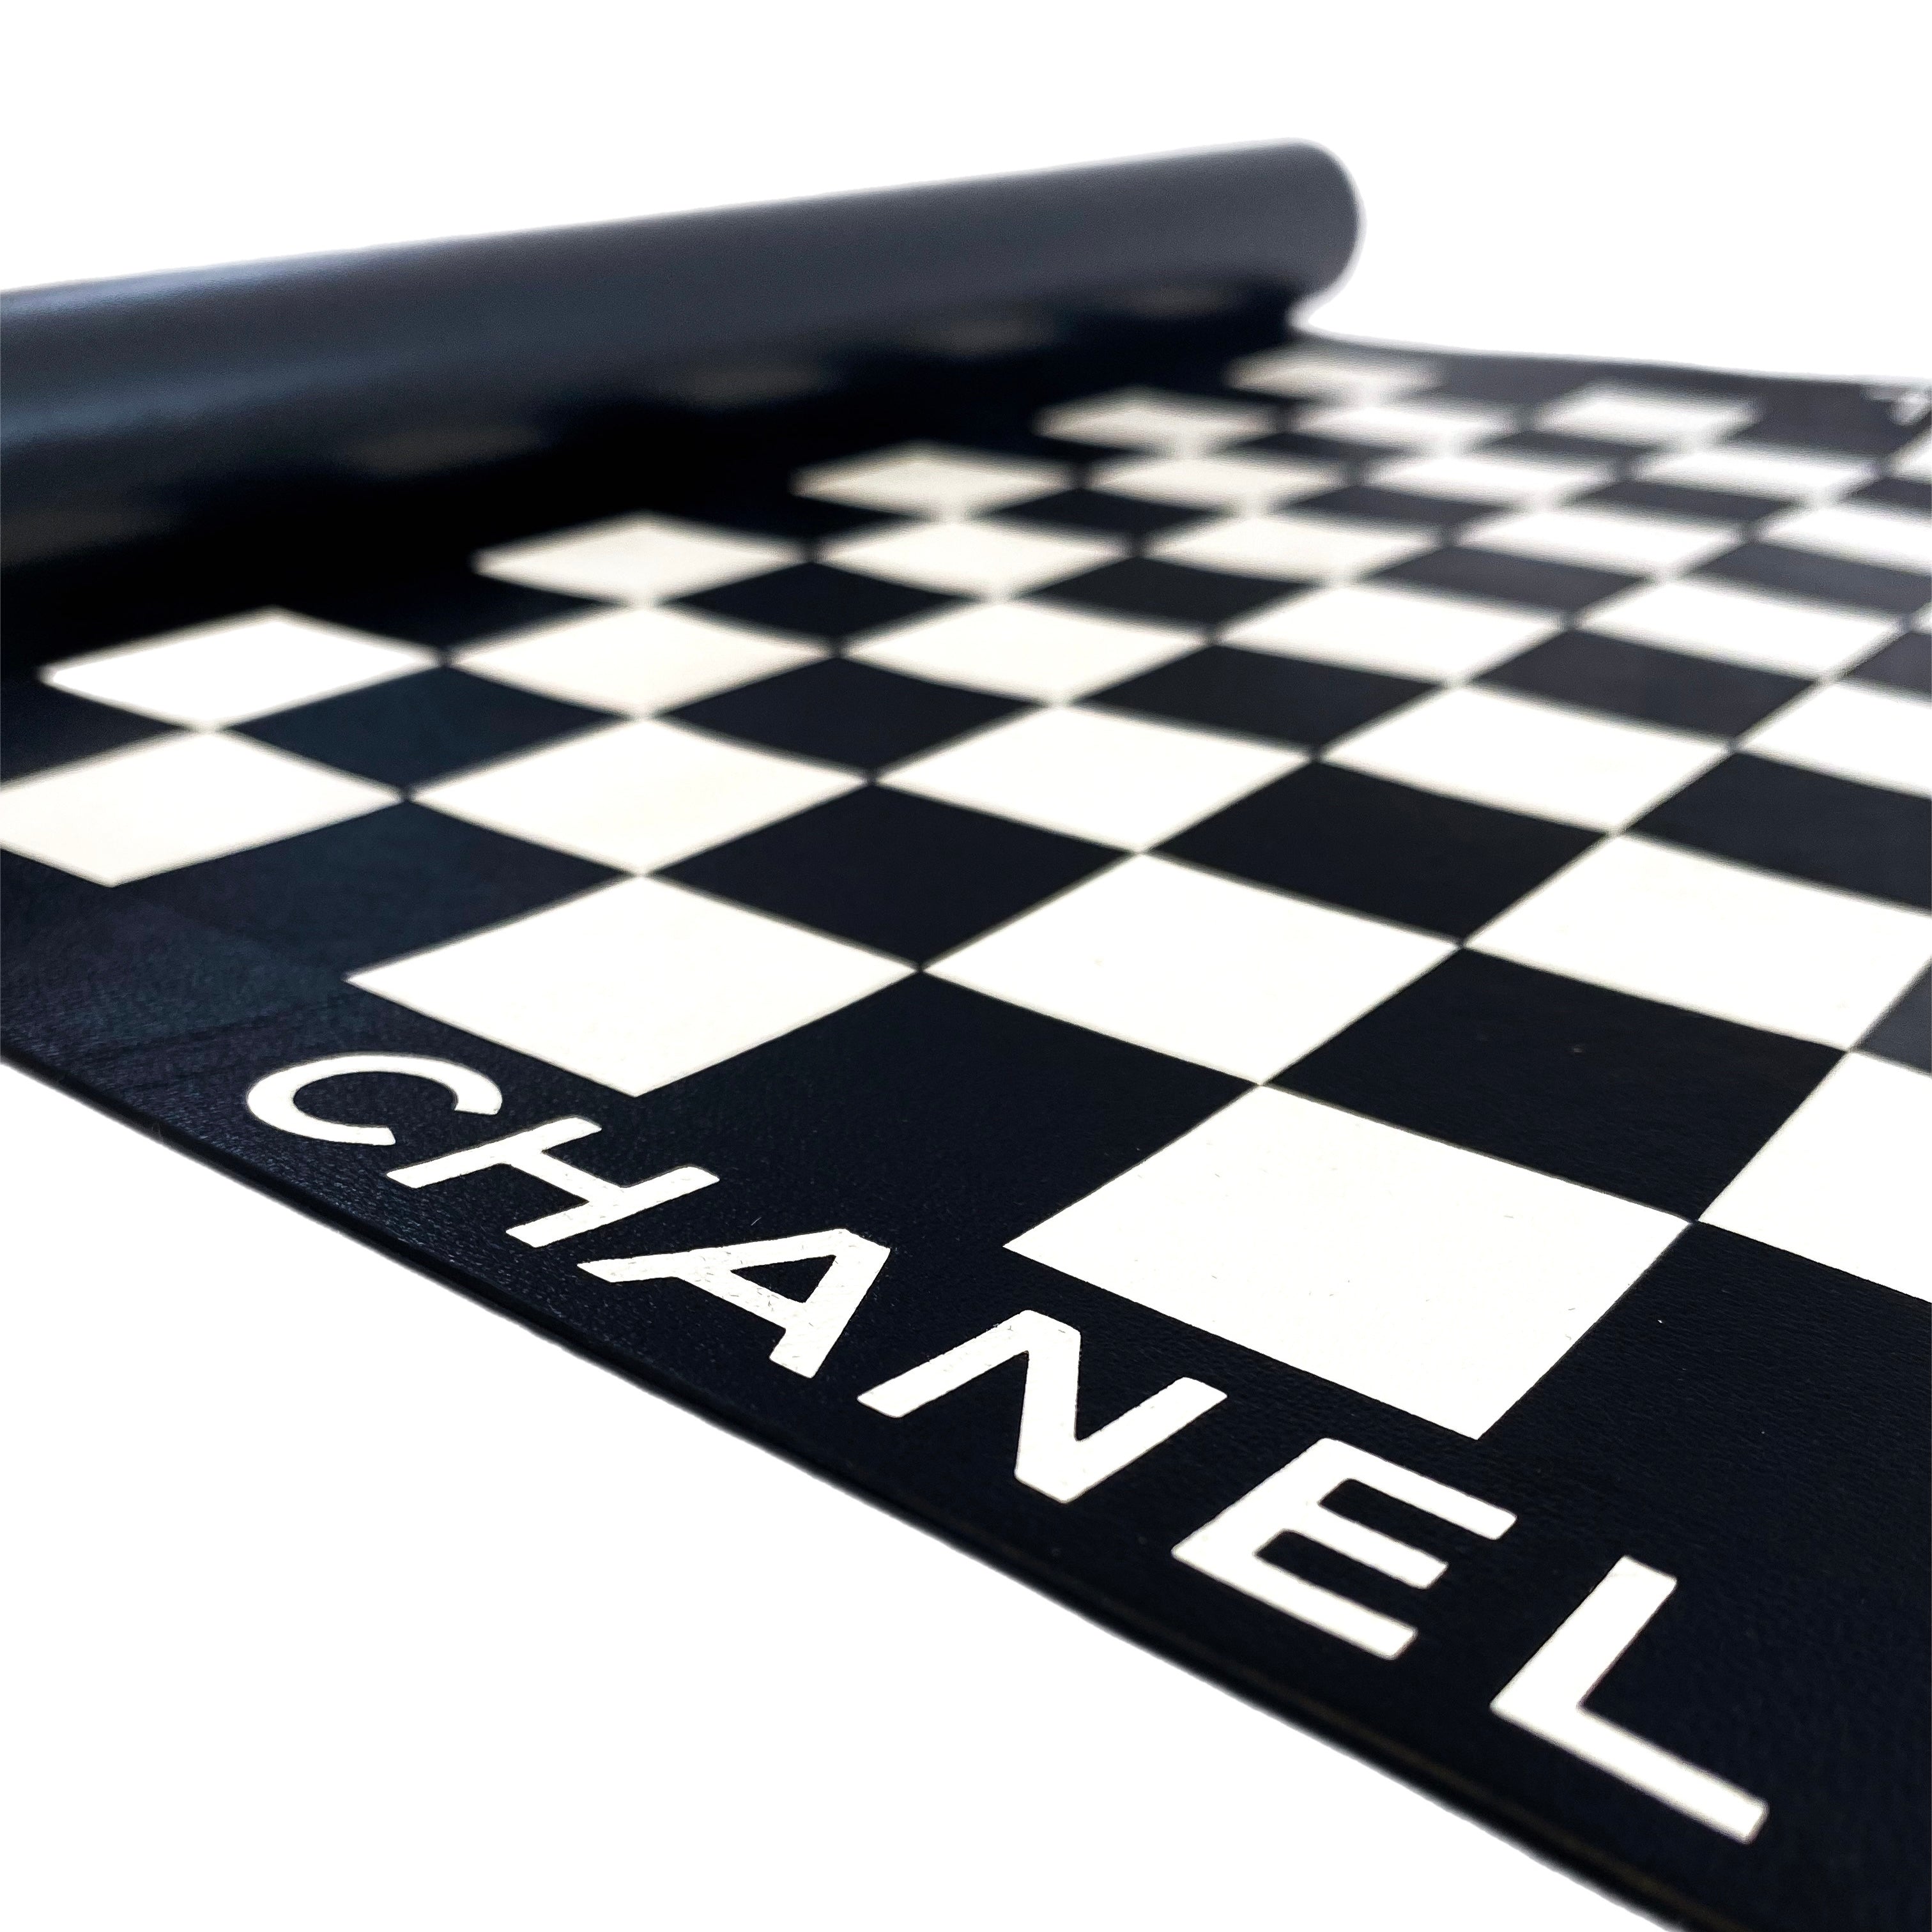 Chanel Limited Edition Checkerboard